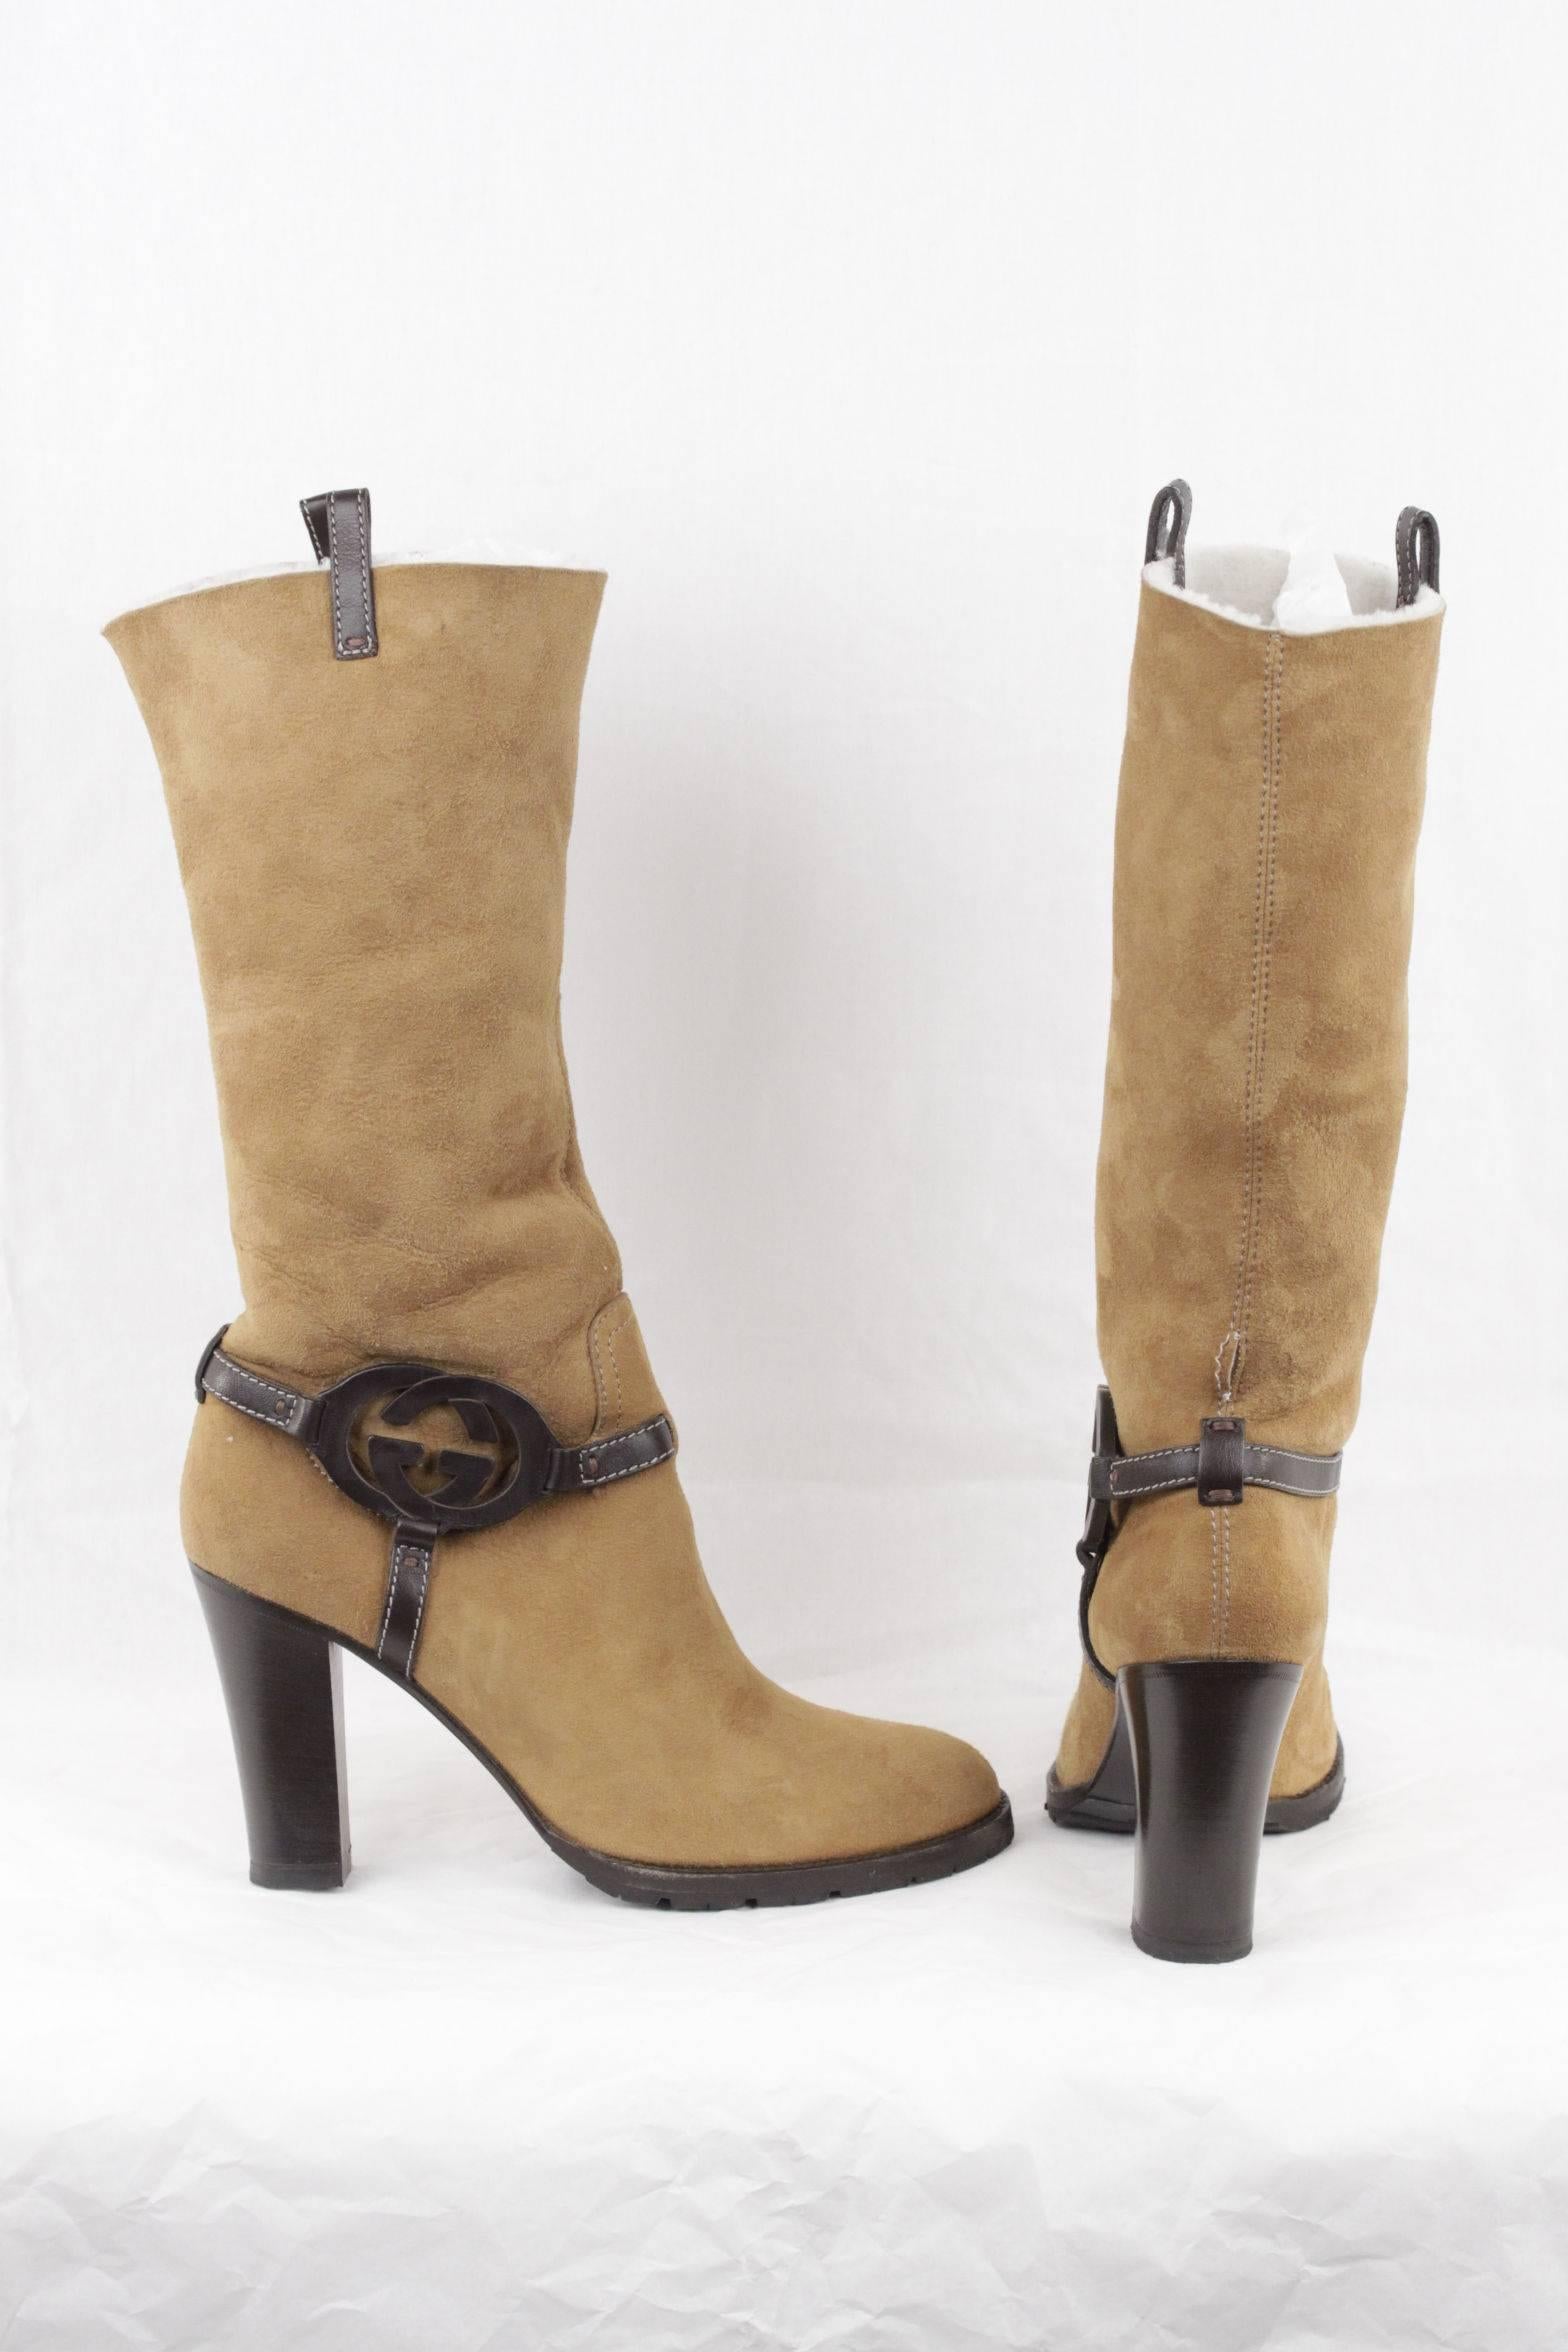 GUCCI Beige Suede HEELED BOOTS Shearling Lining GG LOGO Size 38 1/2 In Good Condition In Rome, Rome